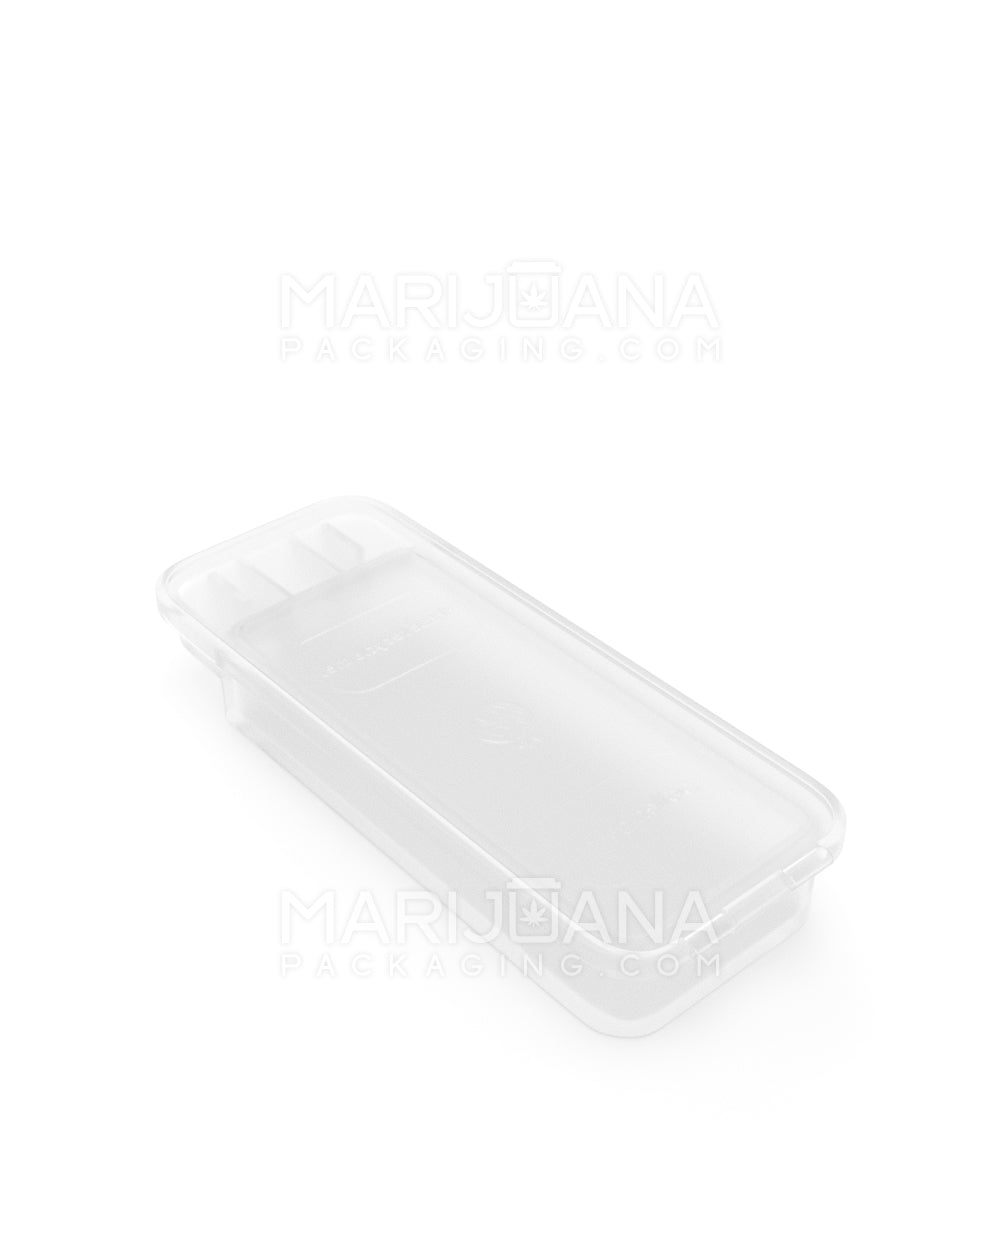 Child Resistant | Snap Box Pre-Roll Joint Case | Small - Clear Plastic - 240 Count - 6